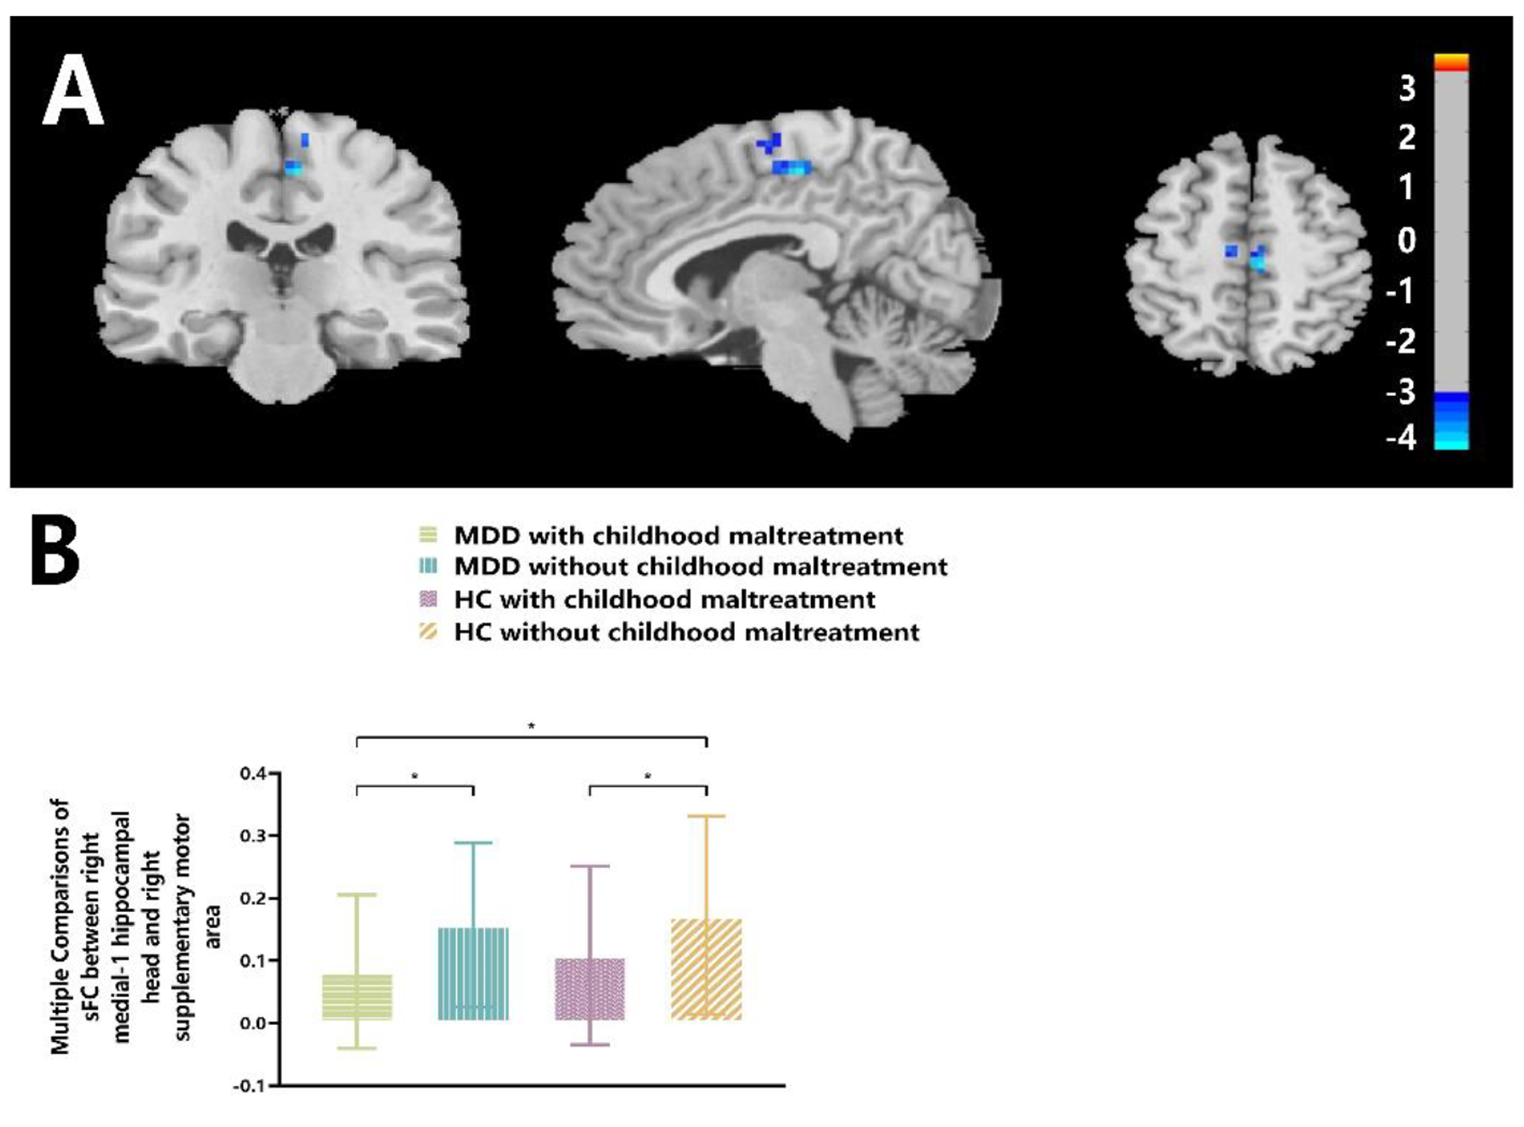 Effects of childhood maltreatment and major depressive disorder on functional connectivity in hippocampal subregions